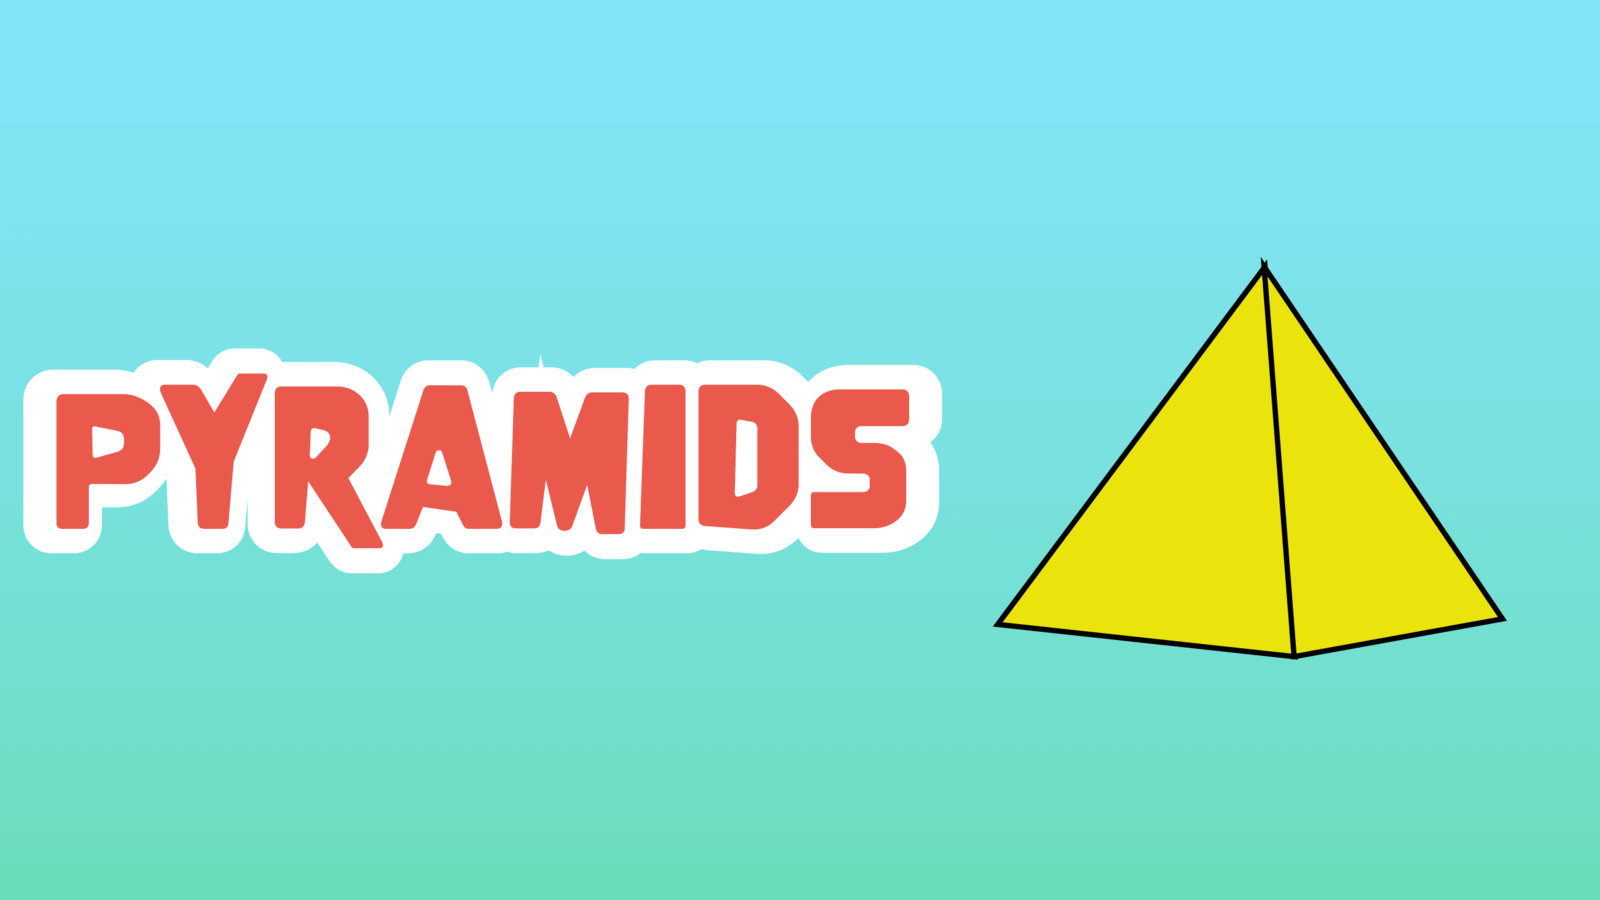 Mathematical Pyramids Facts for Kids – 5 Magical Facts about Mathematical Pyramids